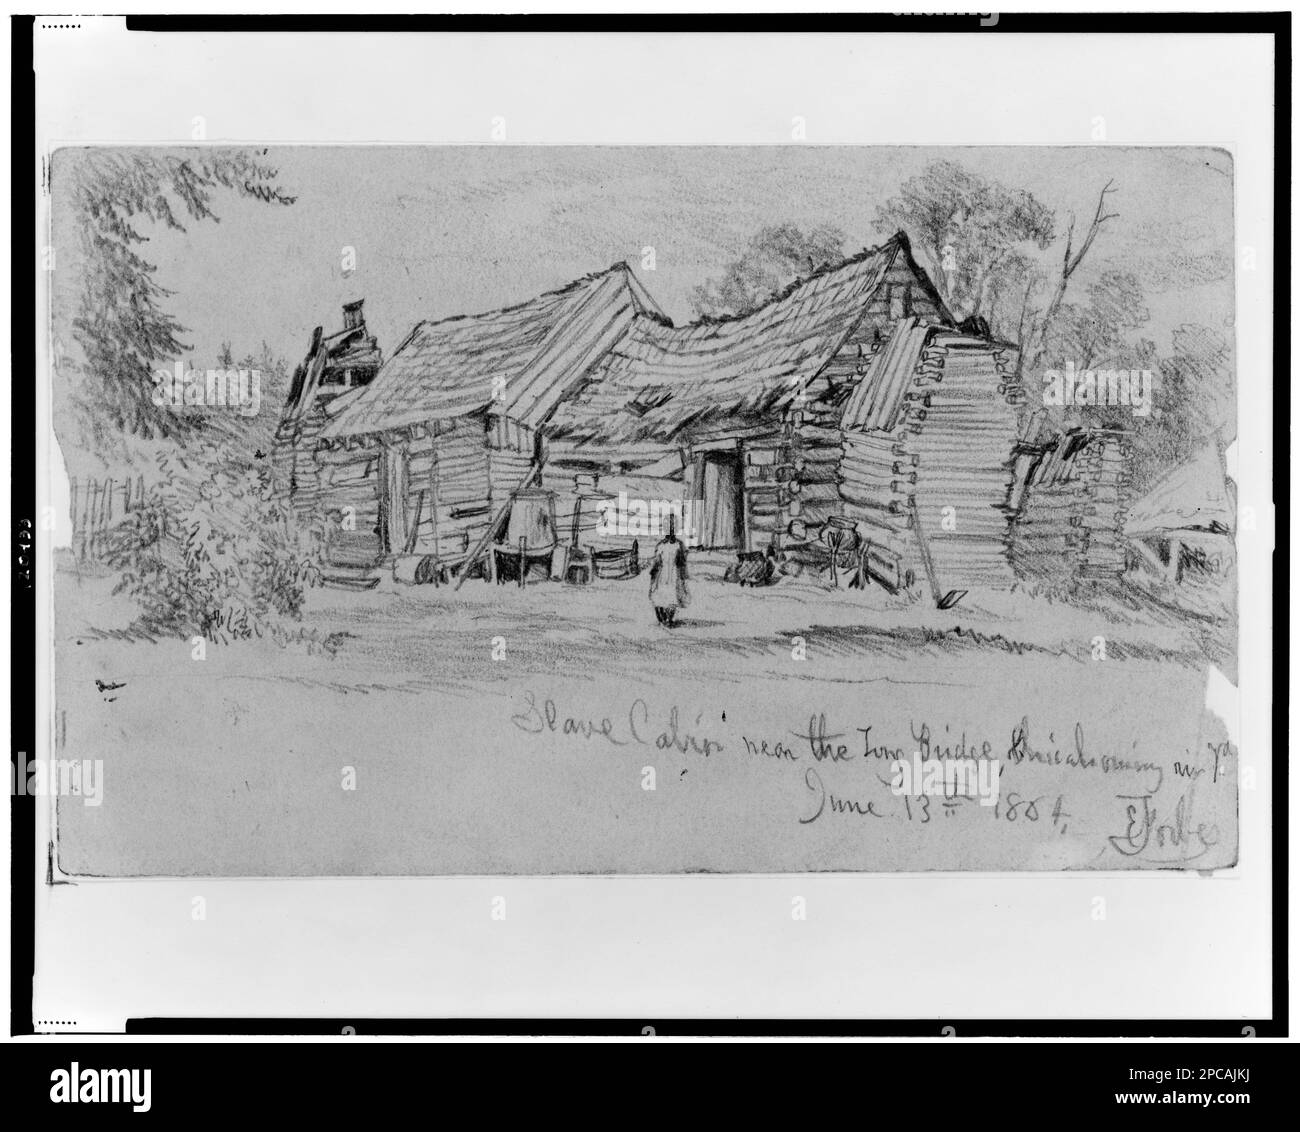 Slave cabin near the Long Bridge, Chicahominy River, Virginia, June 13th 1864 / E. Forbes.. Morgan collection of Civil War drawings. African Americans, Structures, 1860-1870, Log cabins, 1860-1870, Slave quarters, 1860-1870, United States, History, Civil War, 1861-1865, United States, Virginia Stock Photo